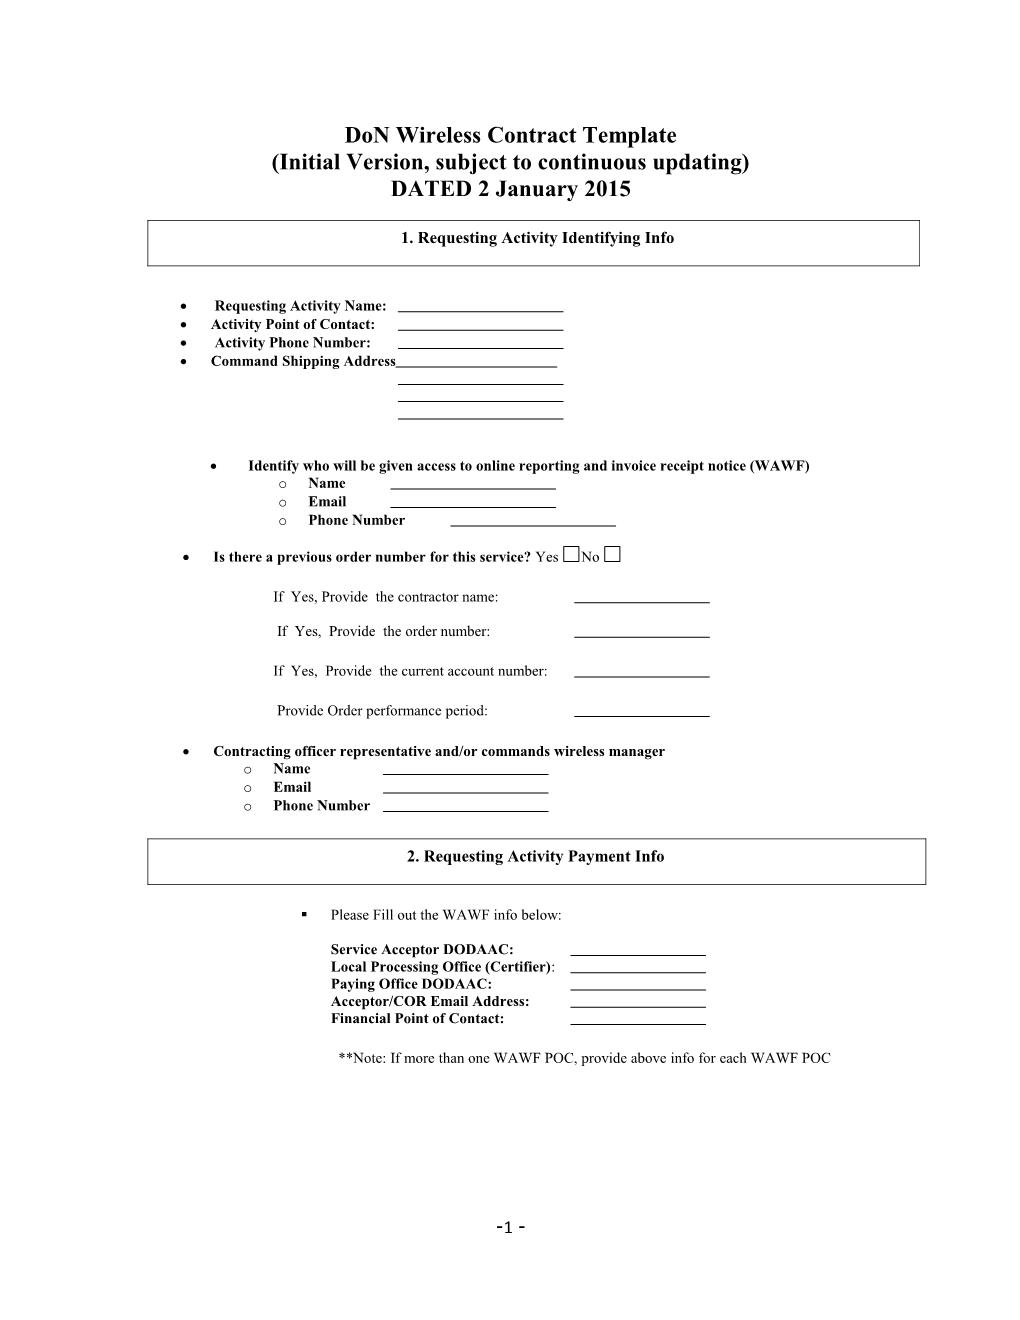 Don Wireless Contract Template